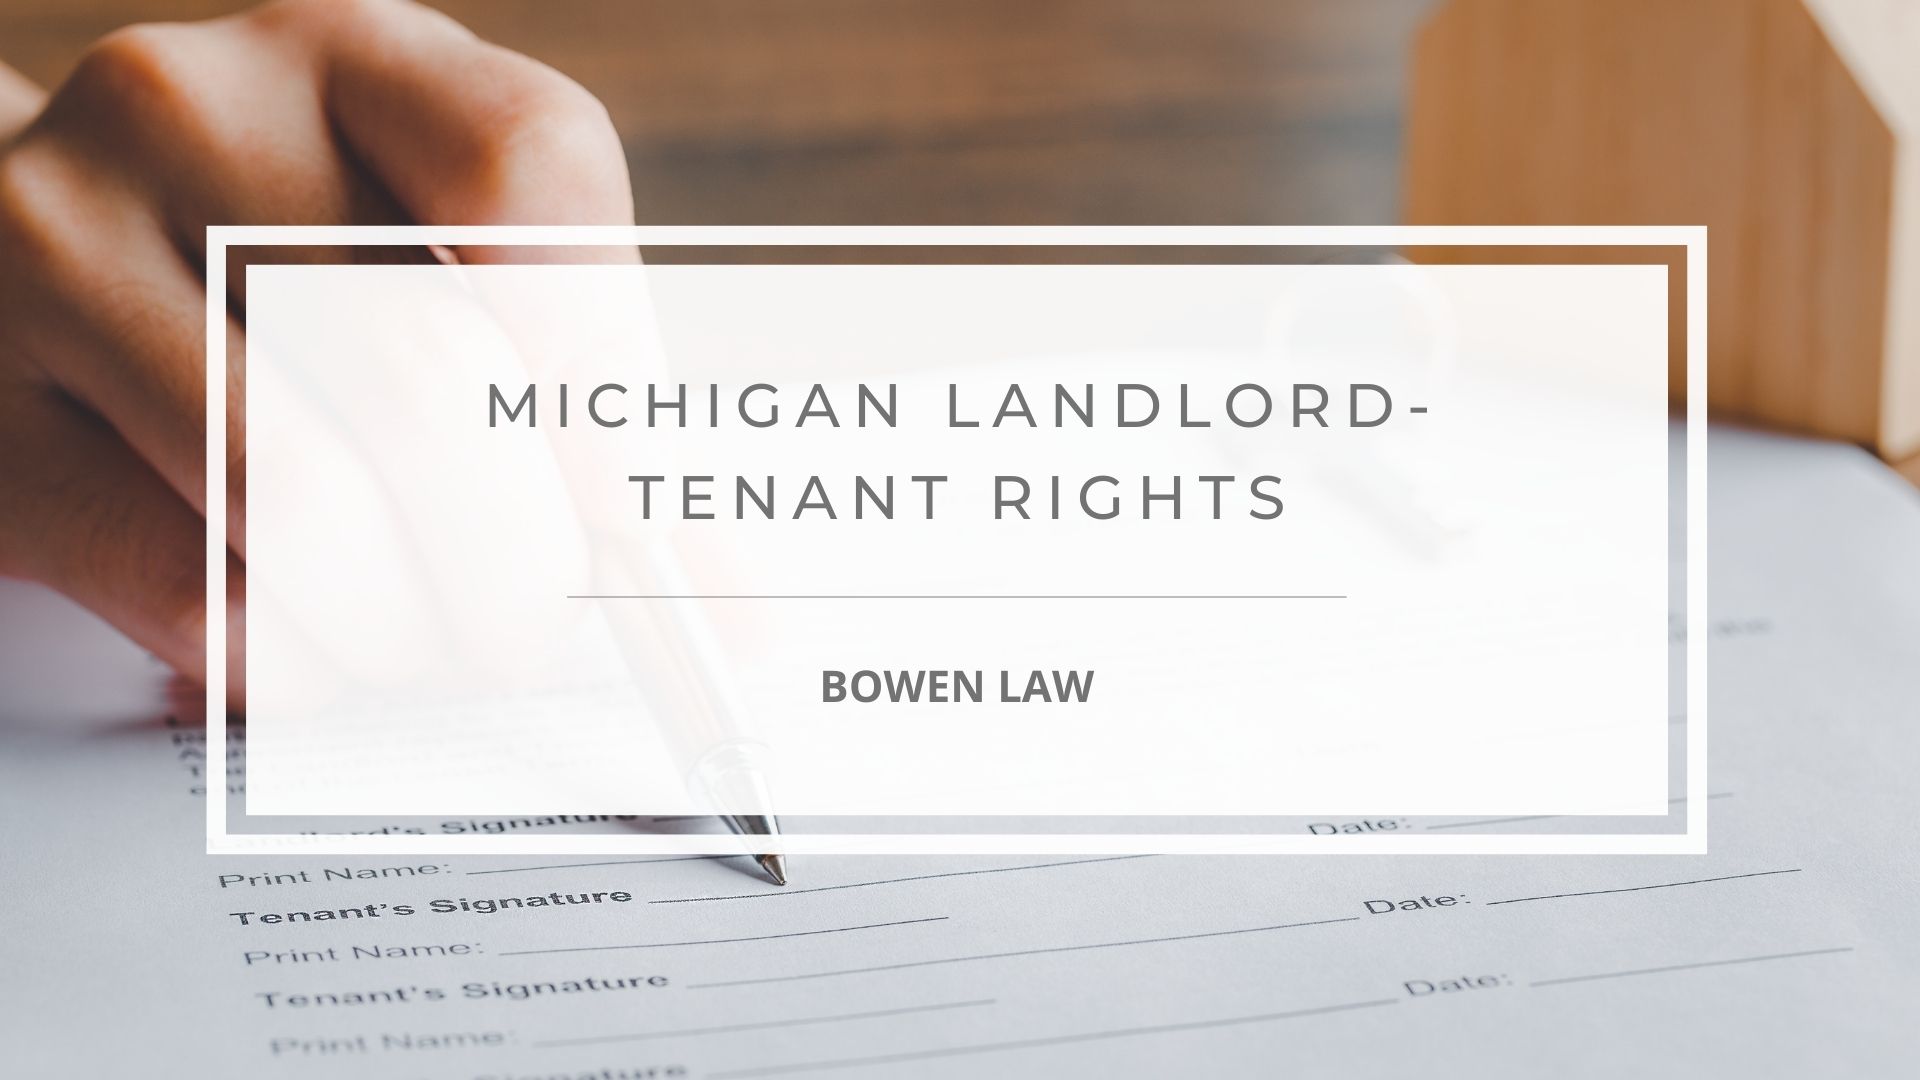 Featured image of michigan landlord tenant rights